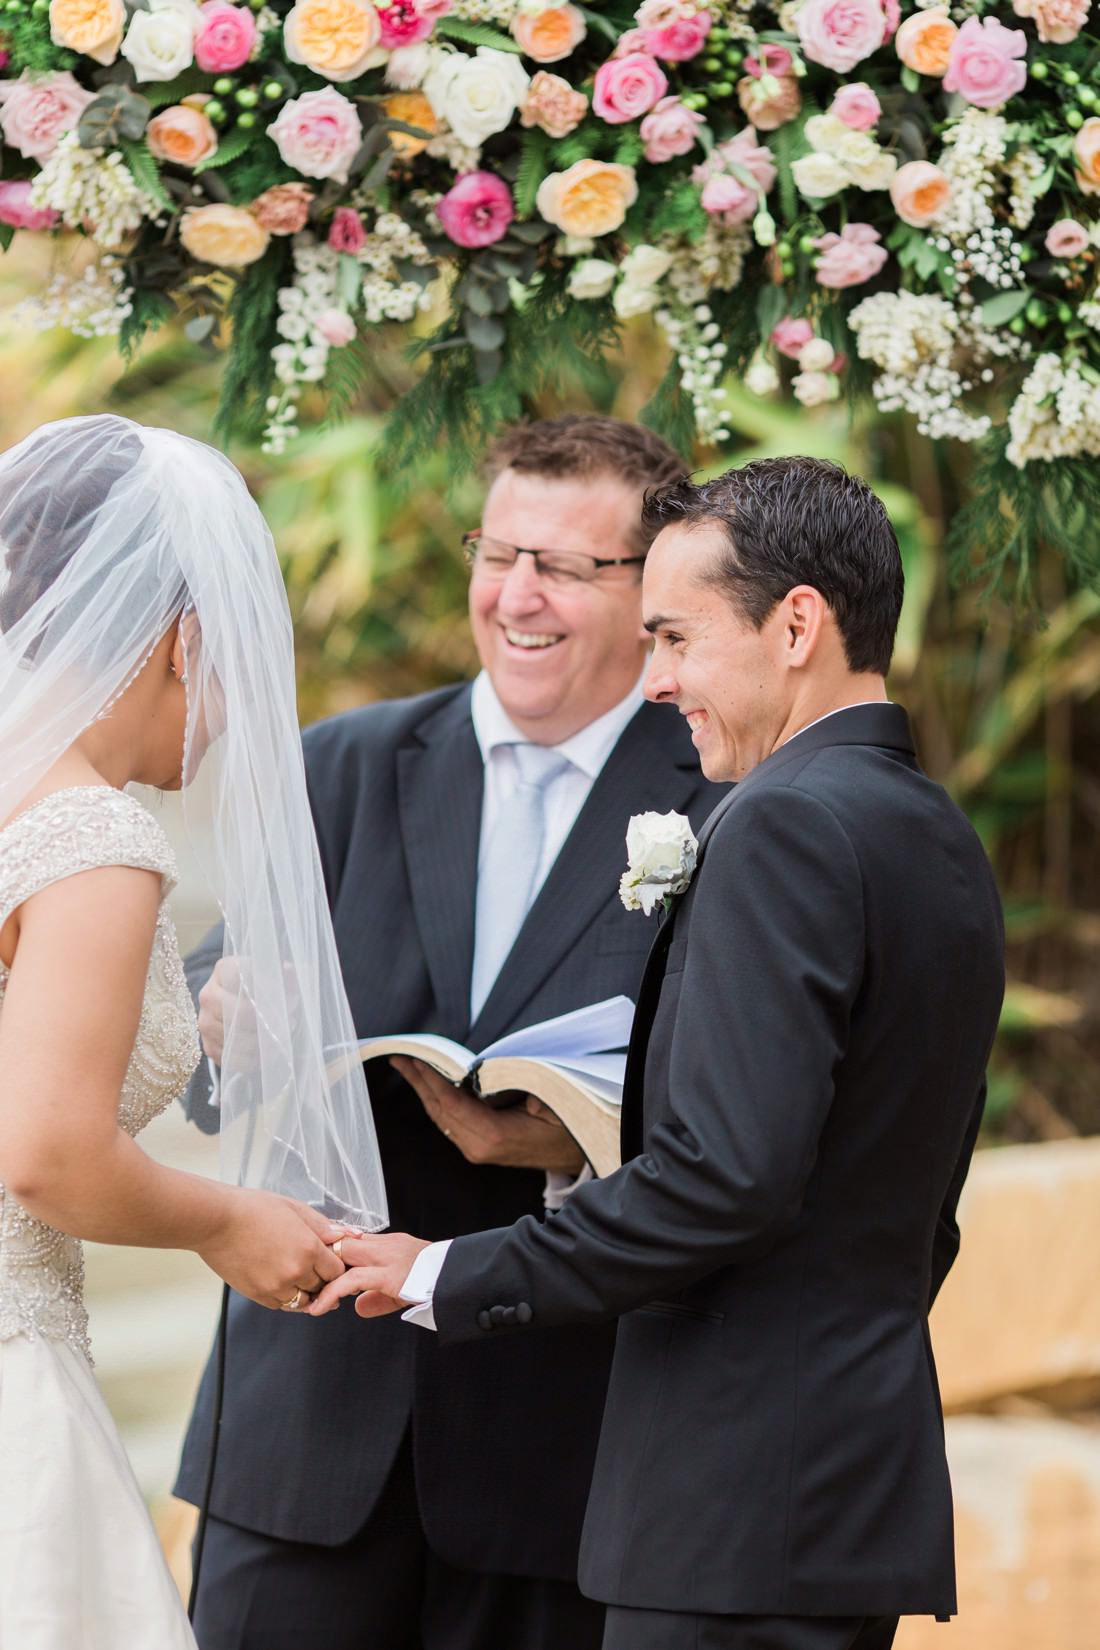 Branell Homestead wedding by Mario Colli Photography